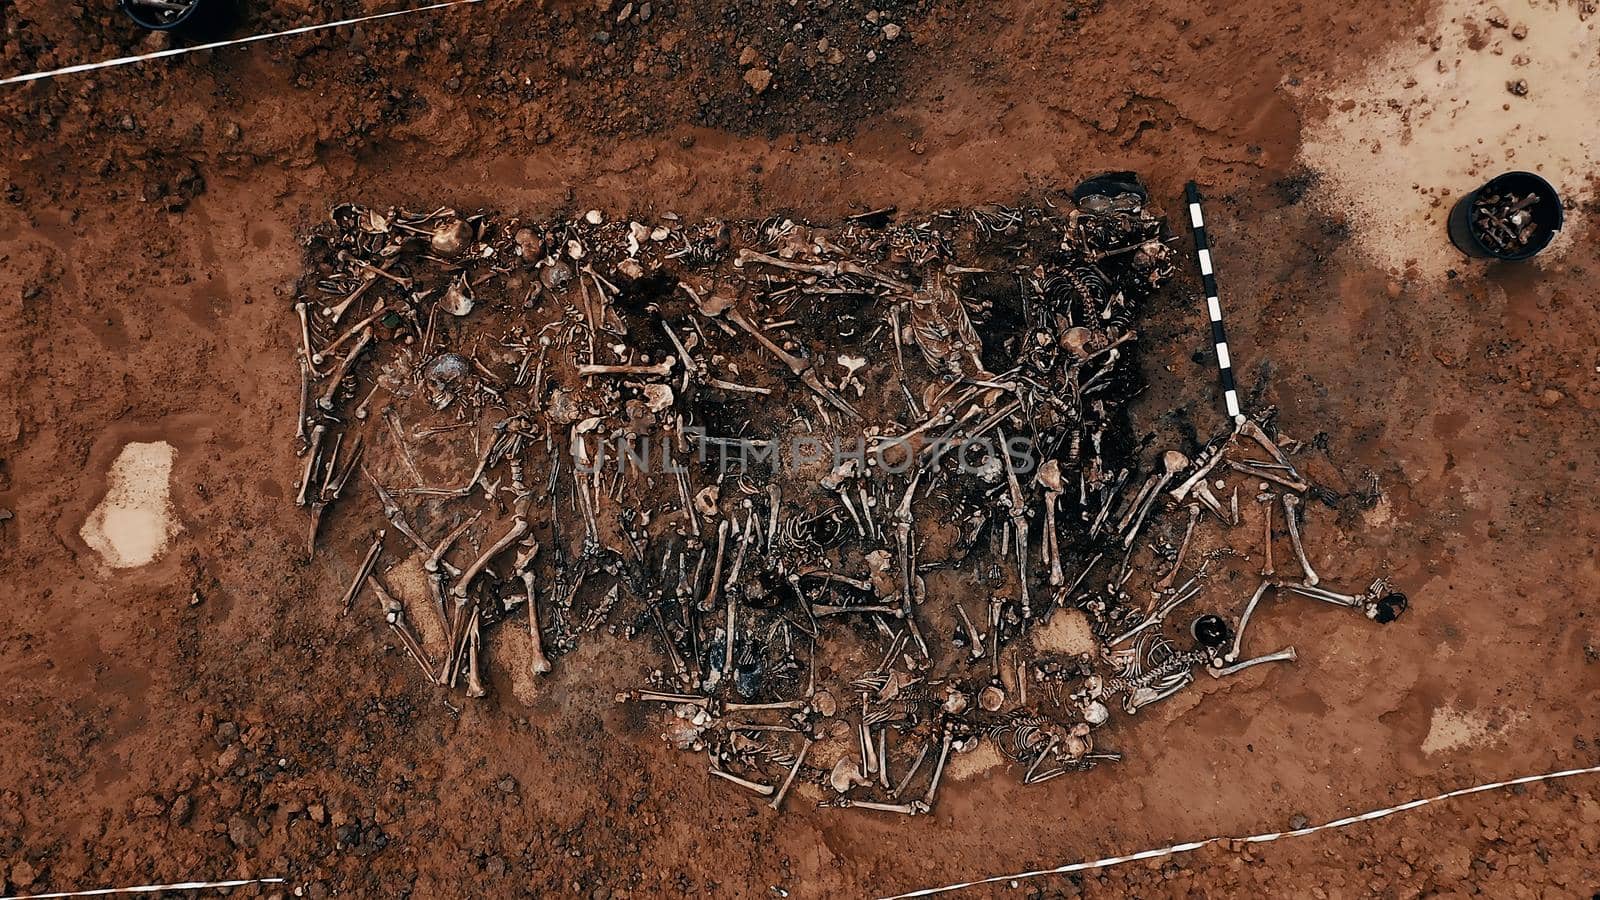 Archaeological excavations at the crime scene, Human remains in the ground. War crime scene. Site of a mass shooting of people. Human remains - bones of skeleton, skulls by EvgeniyQW